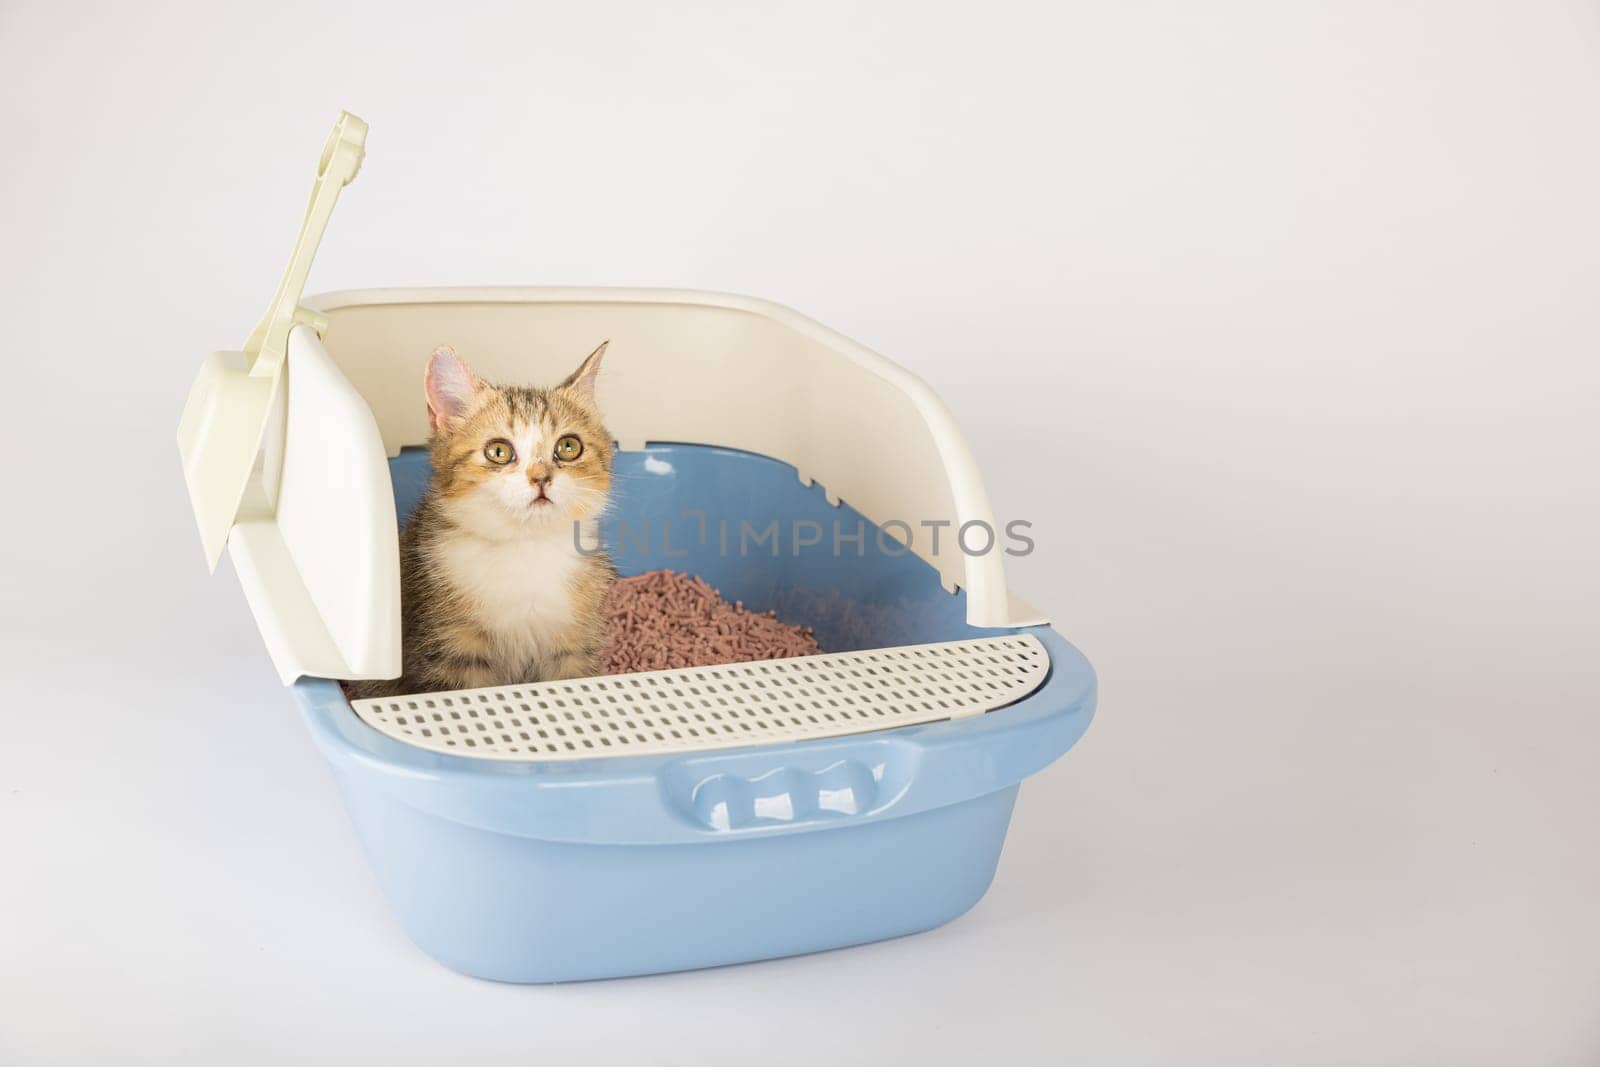 In an isolated scene a cat comfortably occupies a litter box promoting animal care and hygiene. The cat tray set on a clean white background is the cat's chosen toilet. by Sorapop